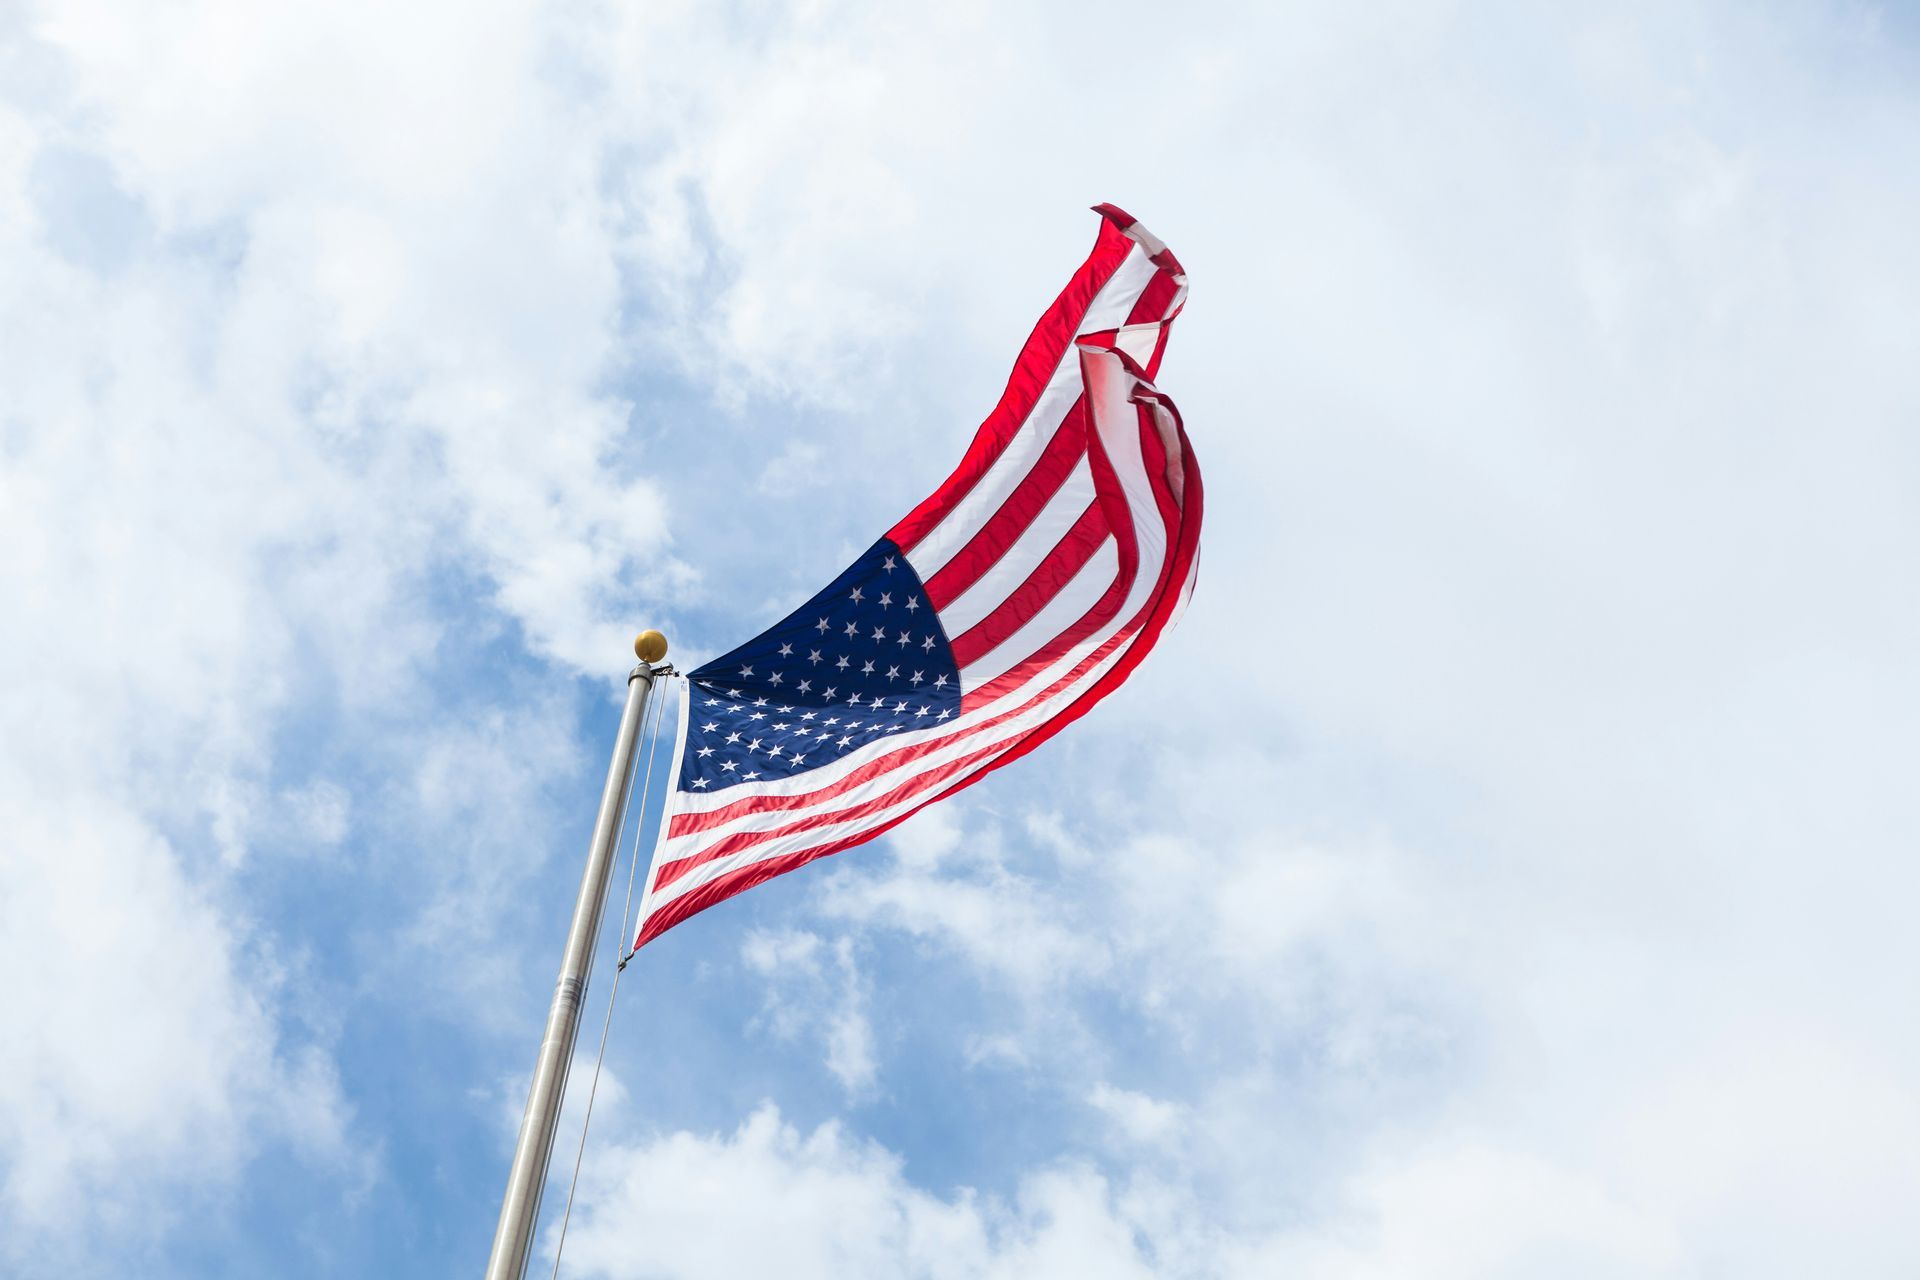 The american flag is waving in the wind against a cloudy blue sky.